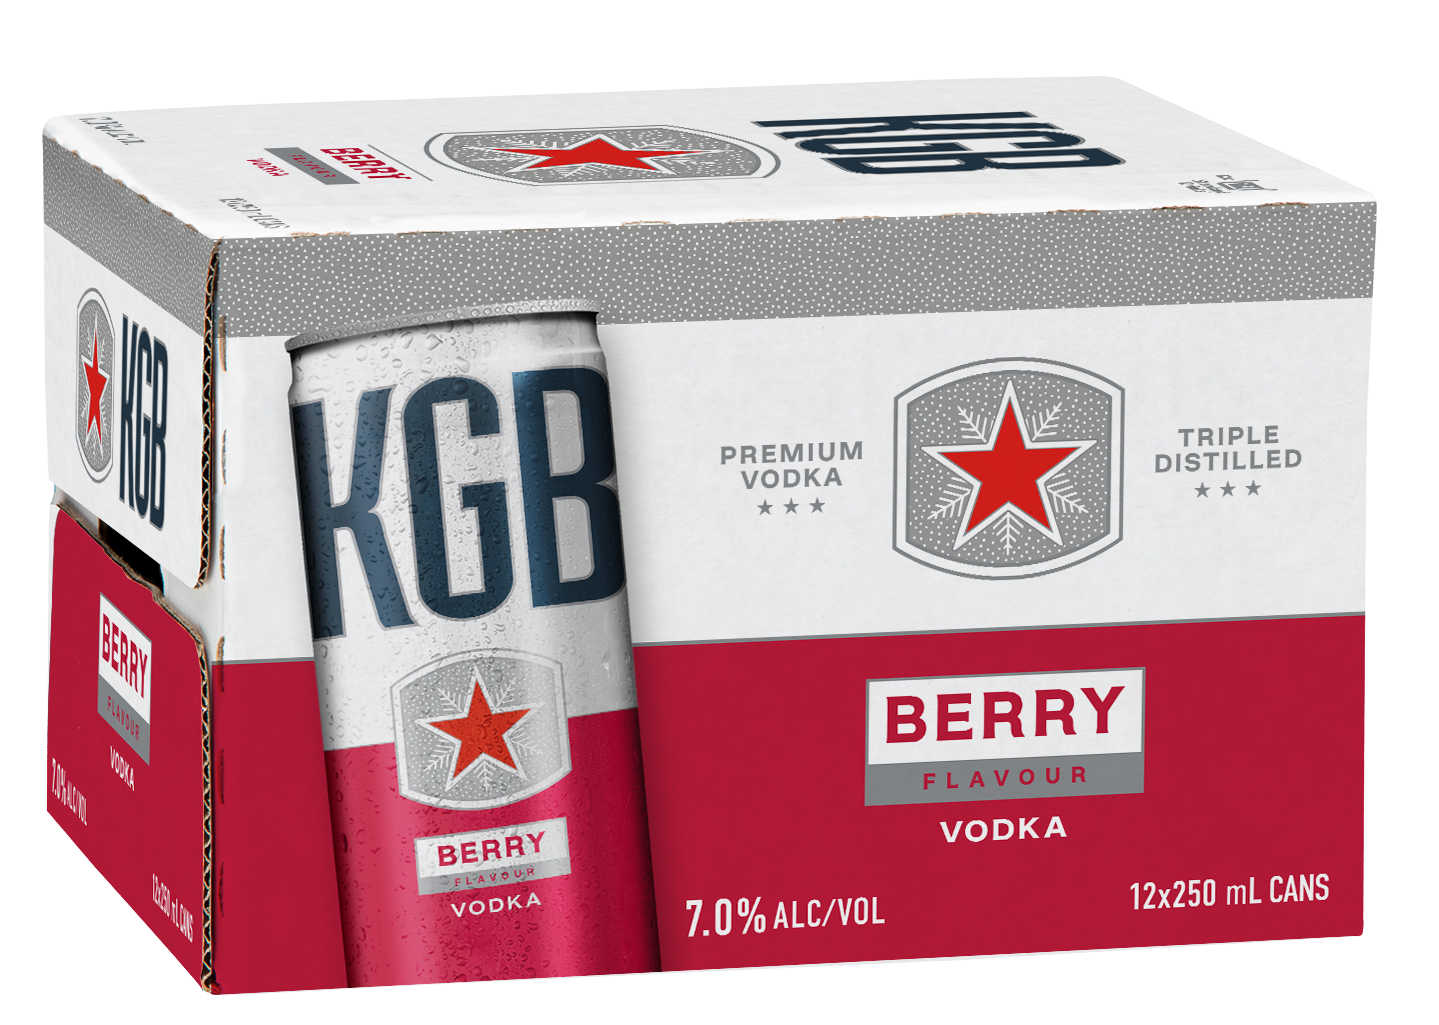 Kgb Berry 7% 12pk 250ml Cans